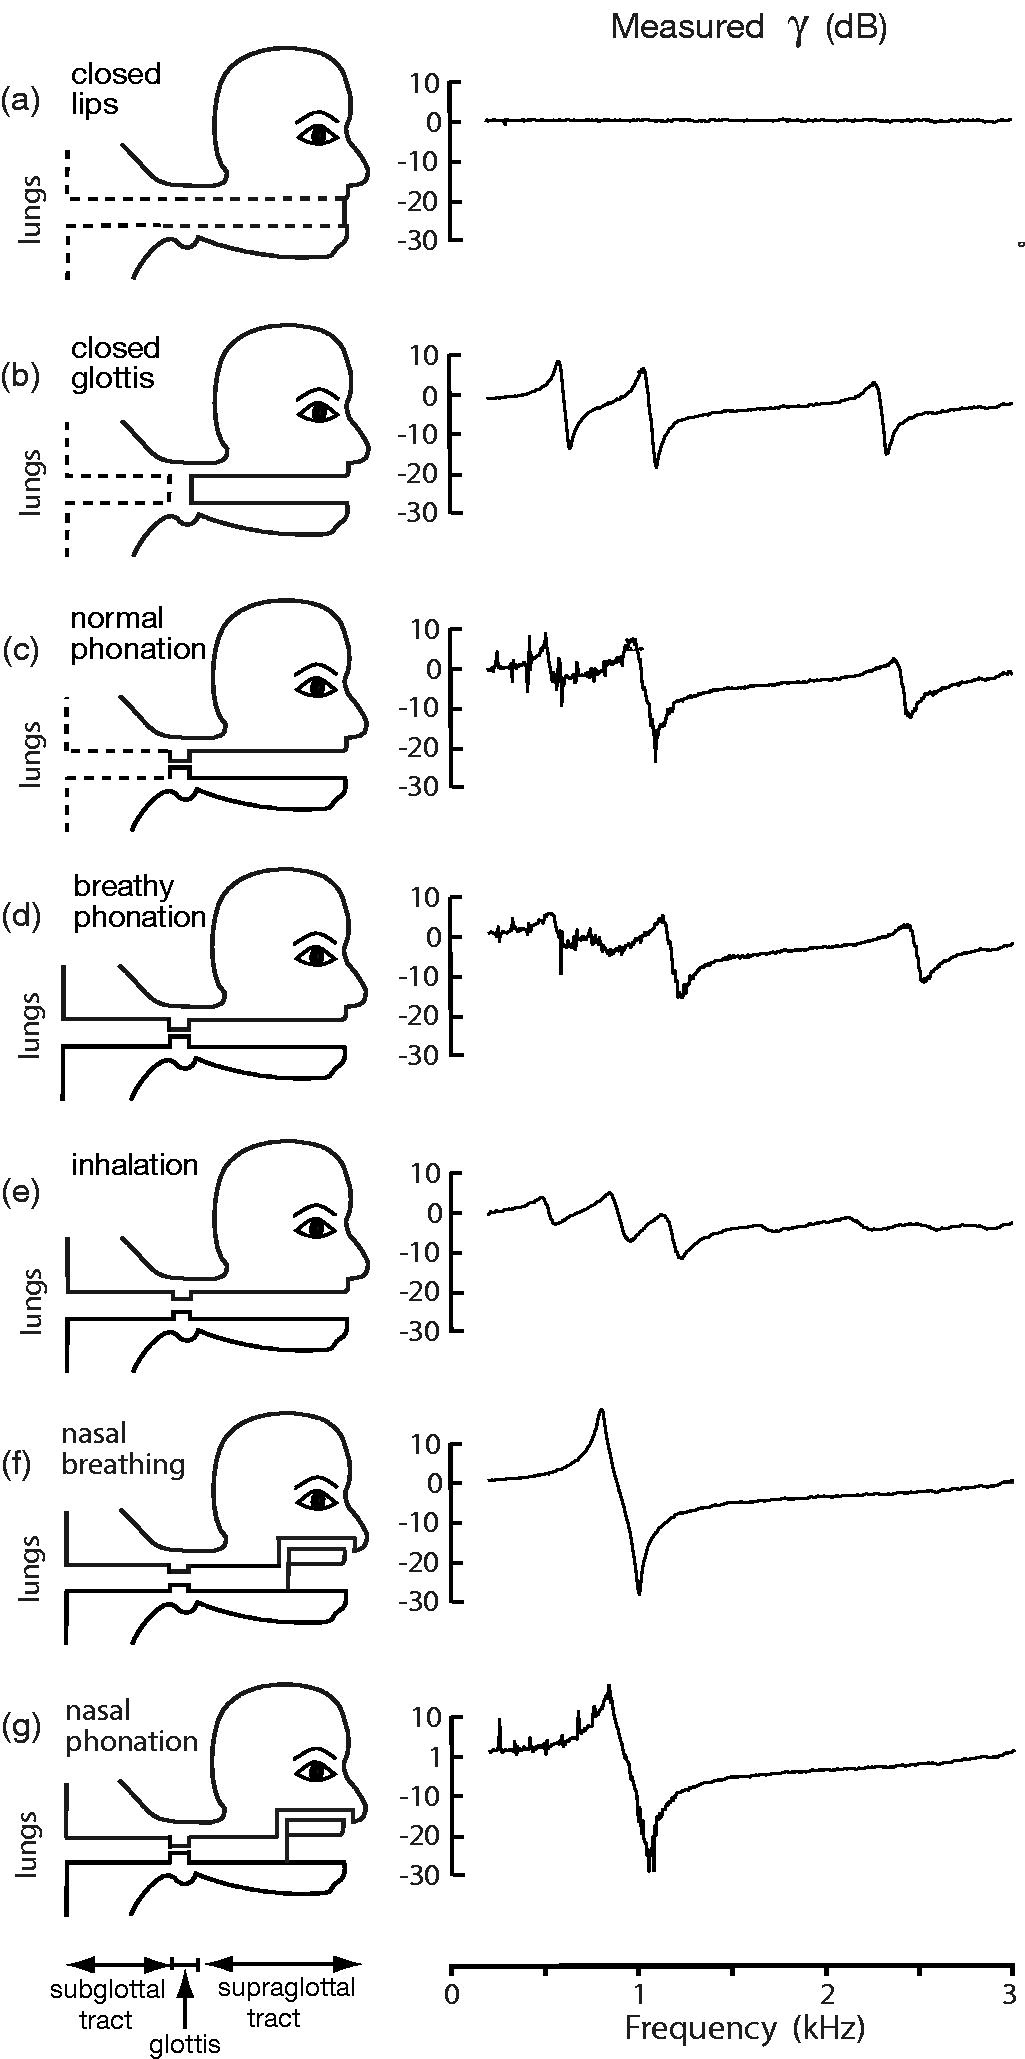 graphs of gamma(f) for seven different gestures